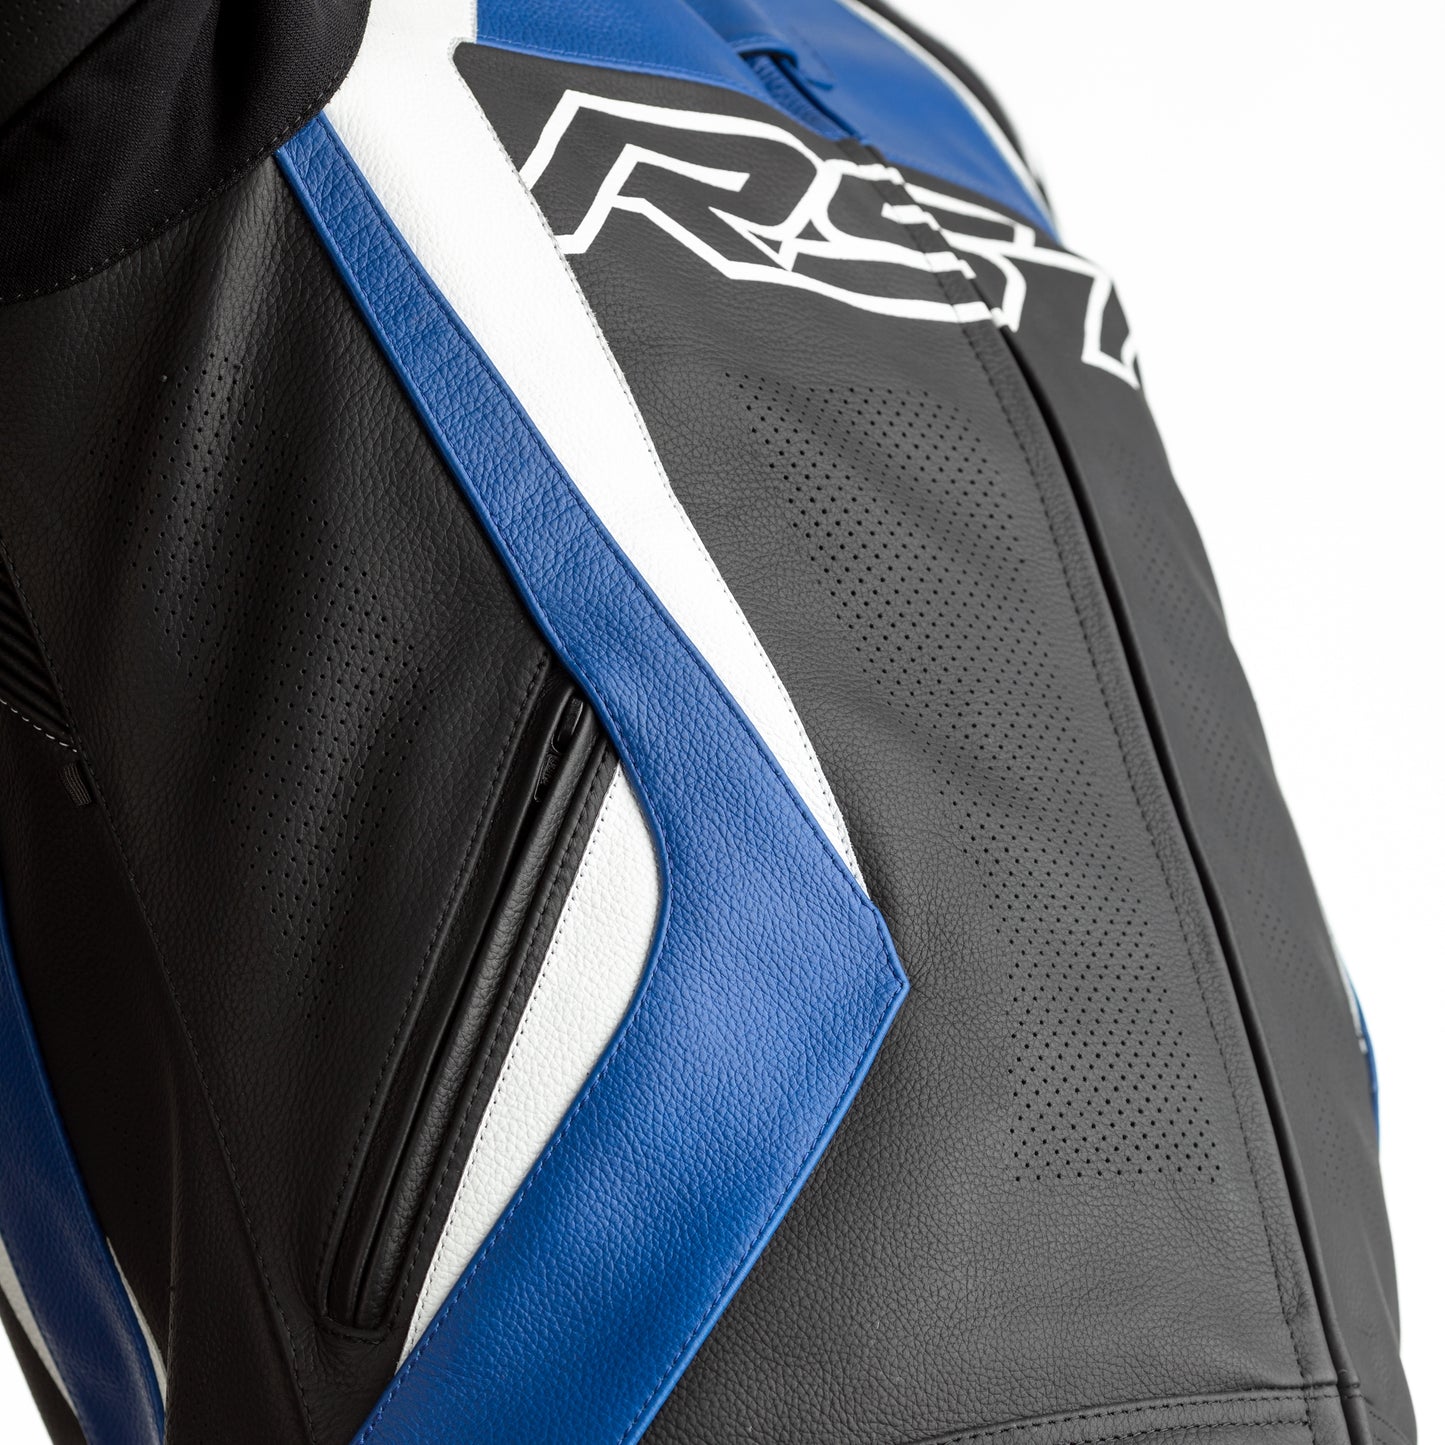 RST Tractech Evo 4 (CE) Leather Jacket - Black / Blue / White